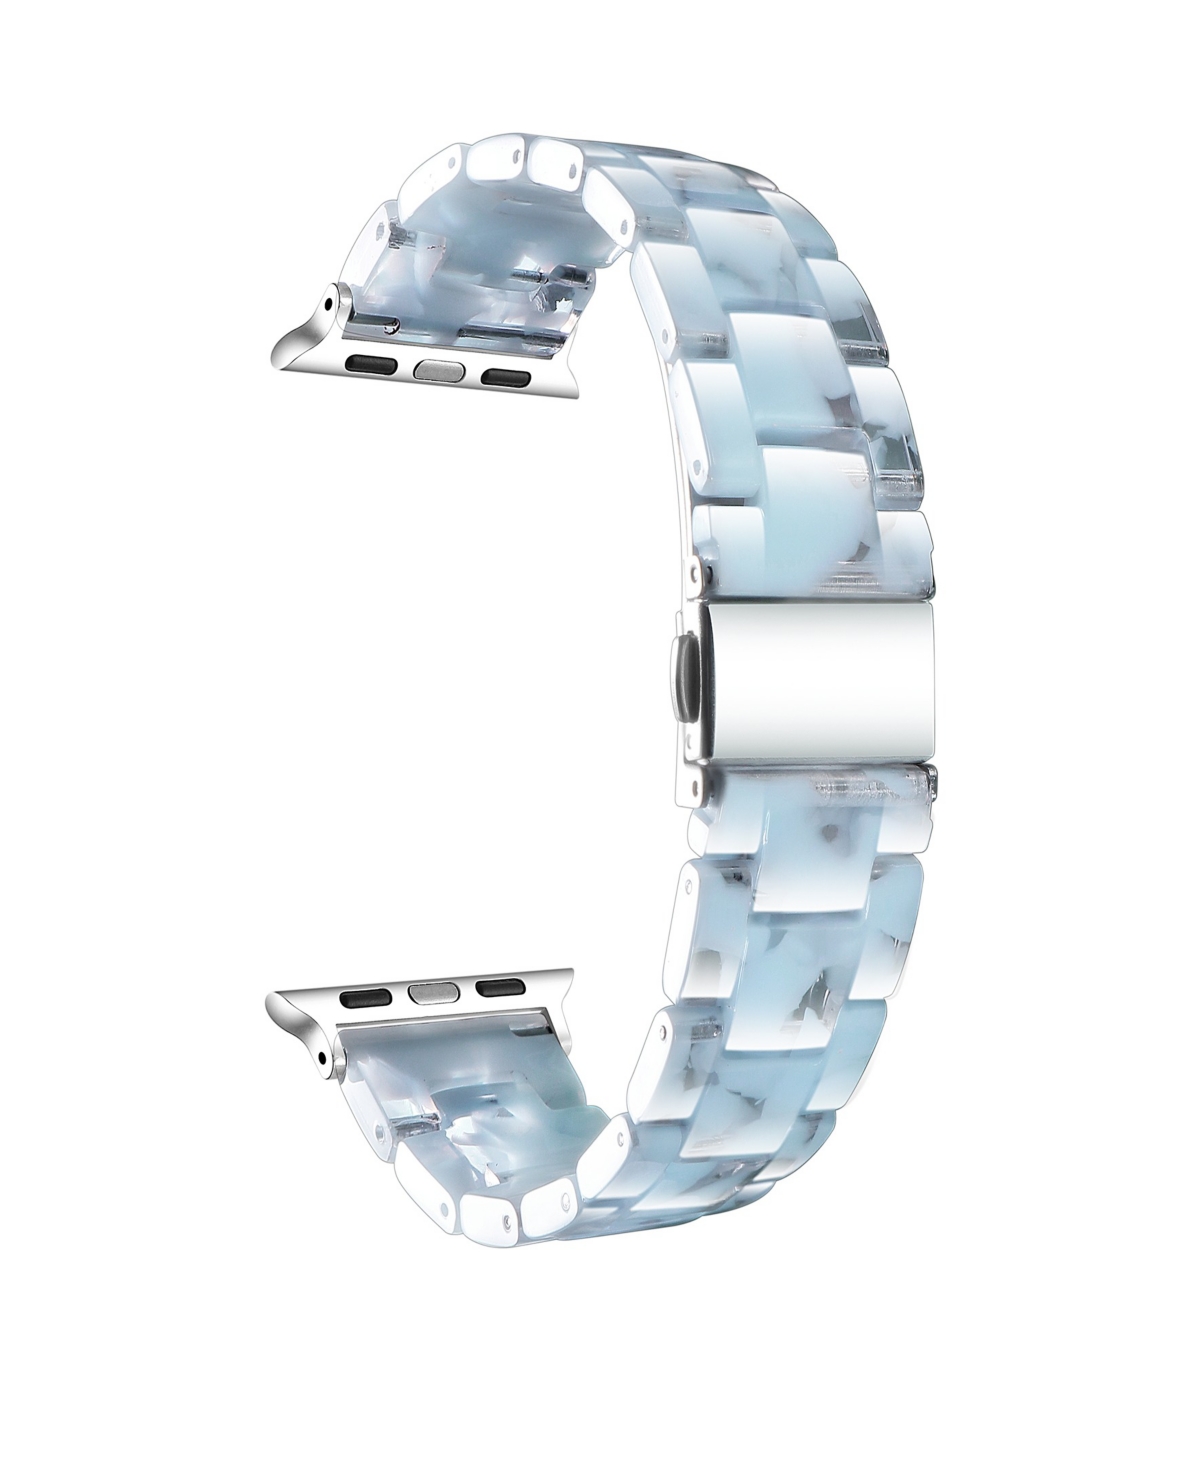 Shop Posh Tech Unisex Claire Light Blue Resin Band For Apple Watch For Size